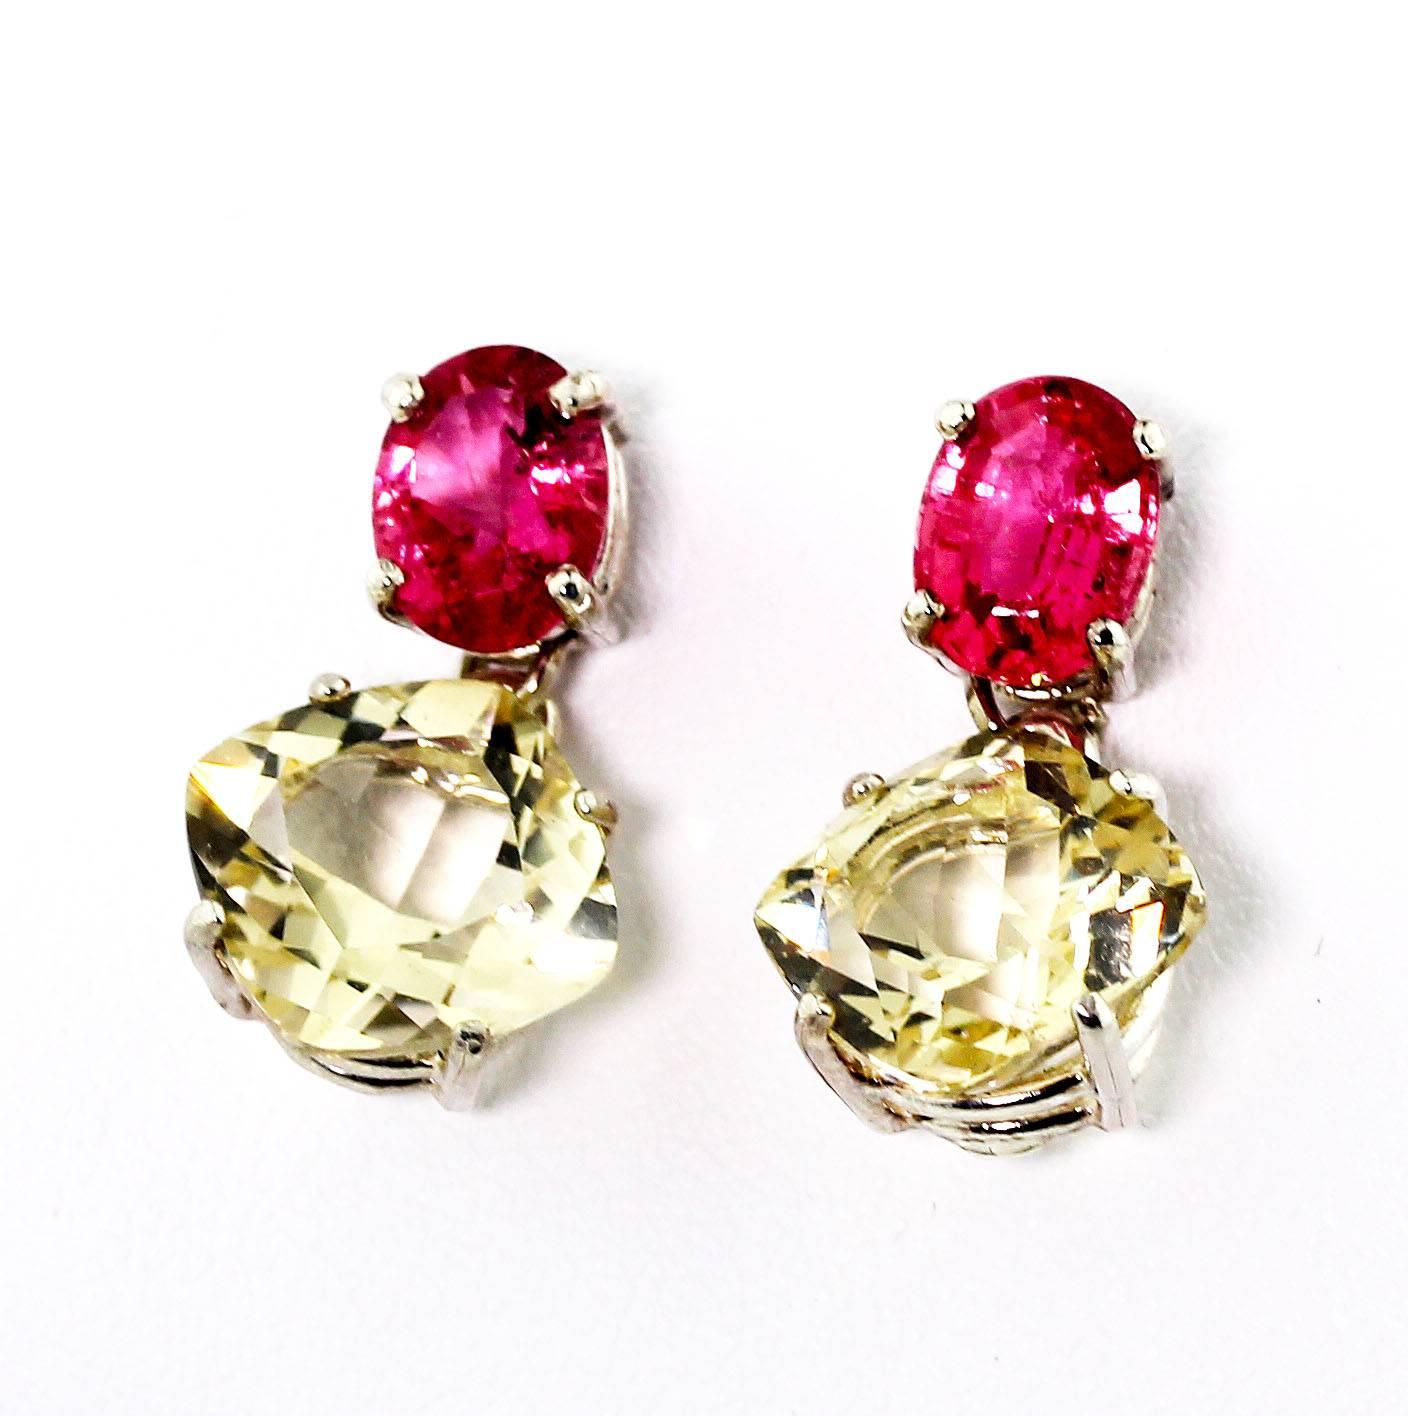 These 2.6 Carats of oval pink Tourmalines (8mm x 6 mm) elegantly dangle 7.94 carats of brilliant sparkling yellow cushion cut Andecine Labradorite (9.7mm x 9.7mm) all set in Sterling Silver stud earrings.  They dangle approximately 7/8 of an inch.